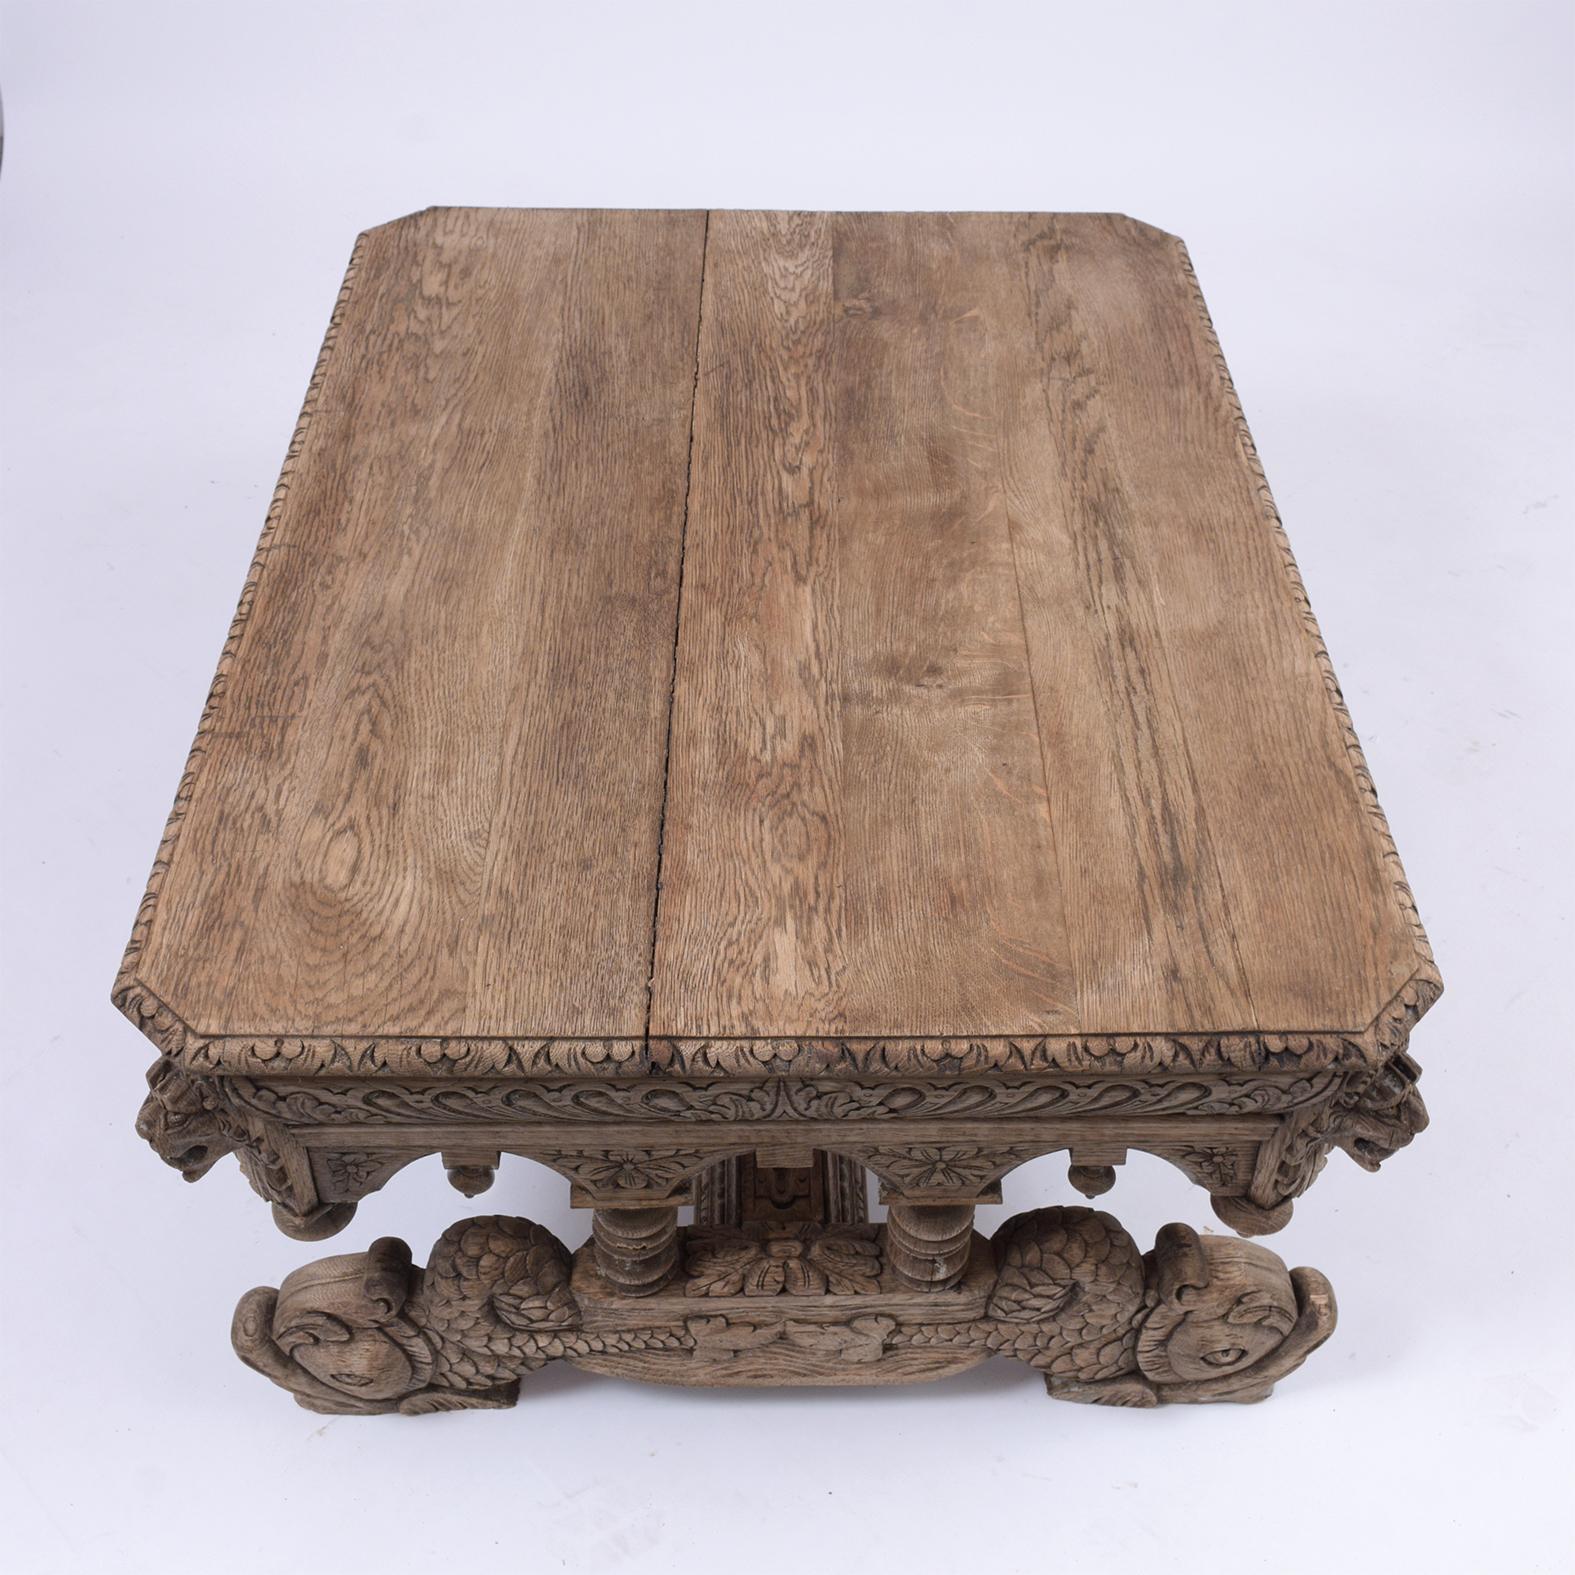 This Antique Renaissance Low Coffee Table is made out of solid oakwood, comes with a large rectangular top with a single drawer, and detailed hand-carved moldings throughout the piece. This table features interact hand-carved lion heads on the